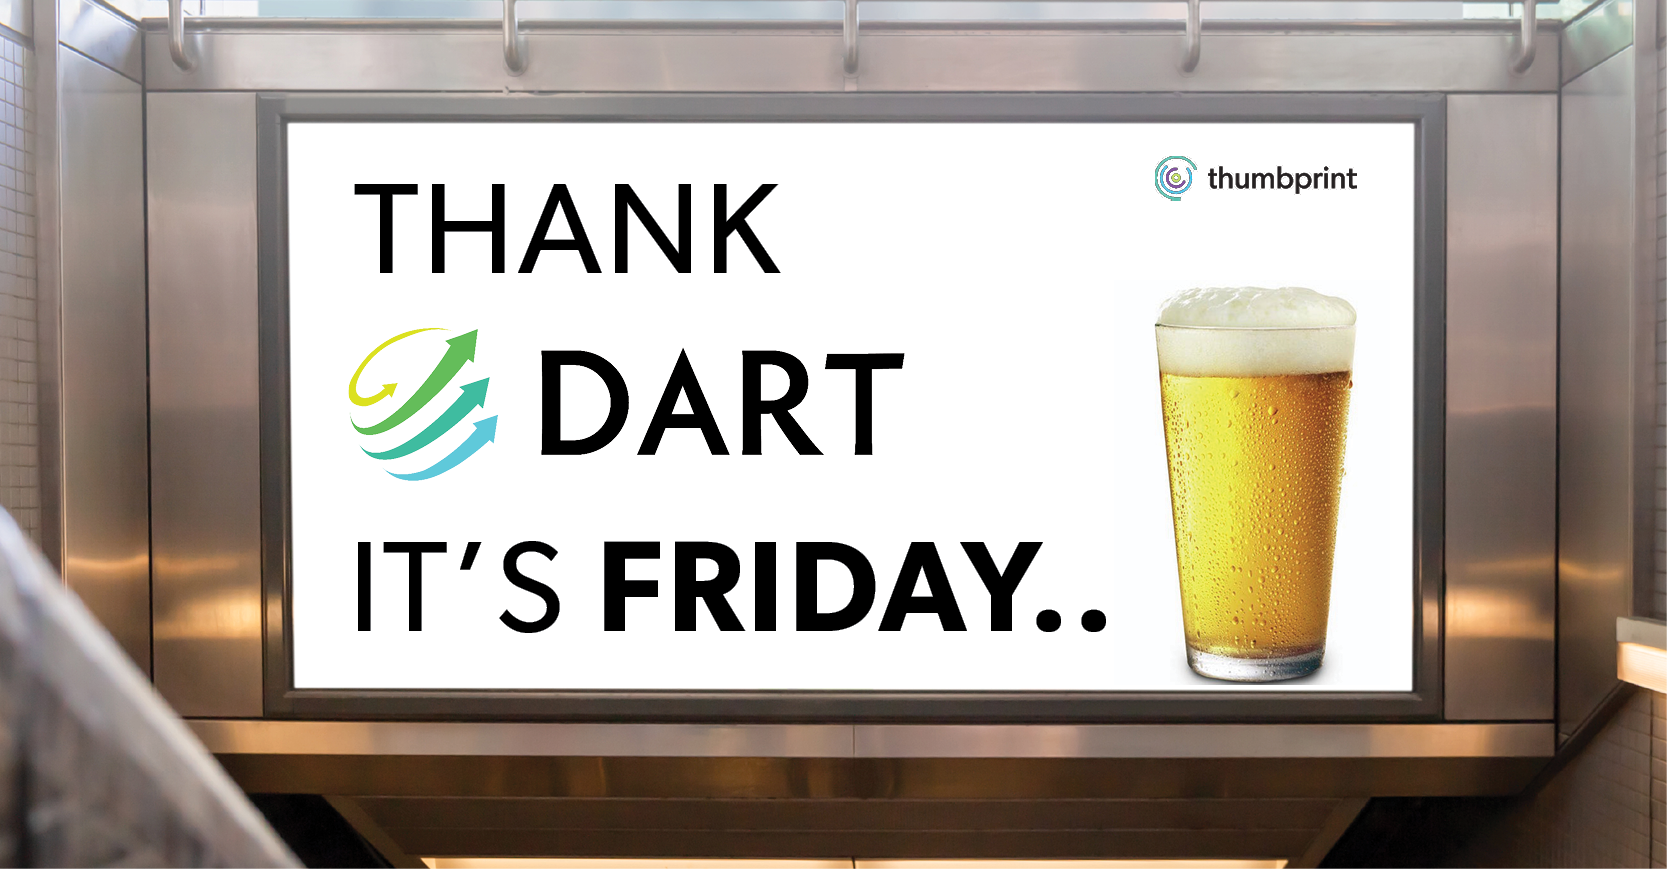 Thank DART it’s Friday! Start the weekend right with data-driven execution…